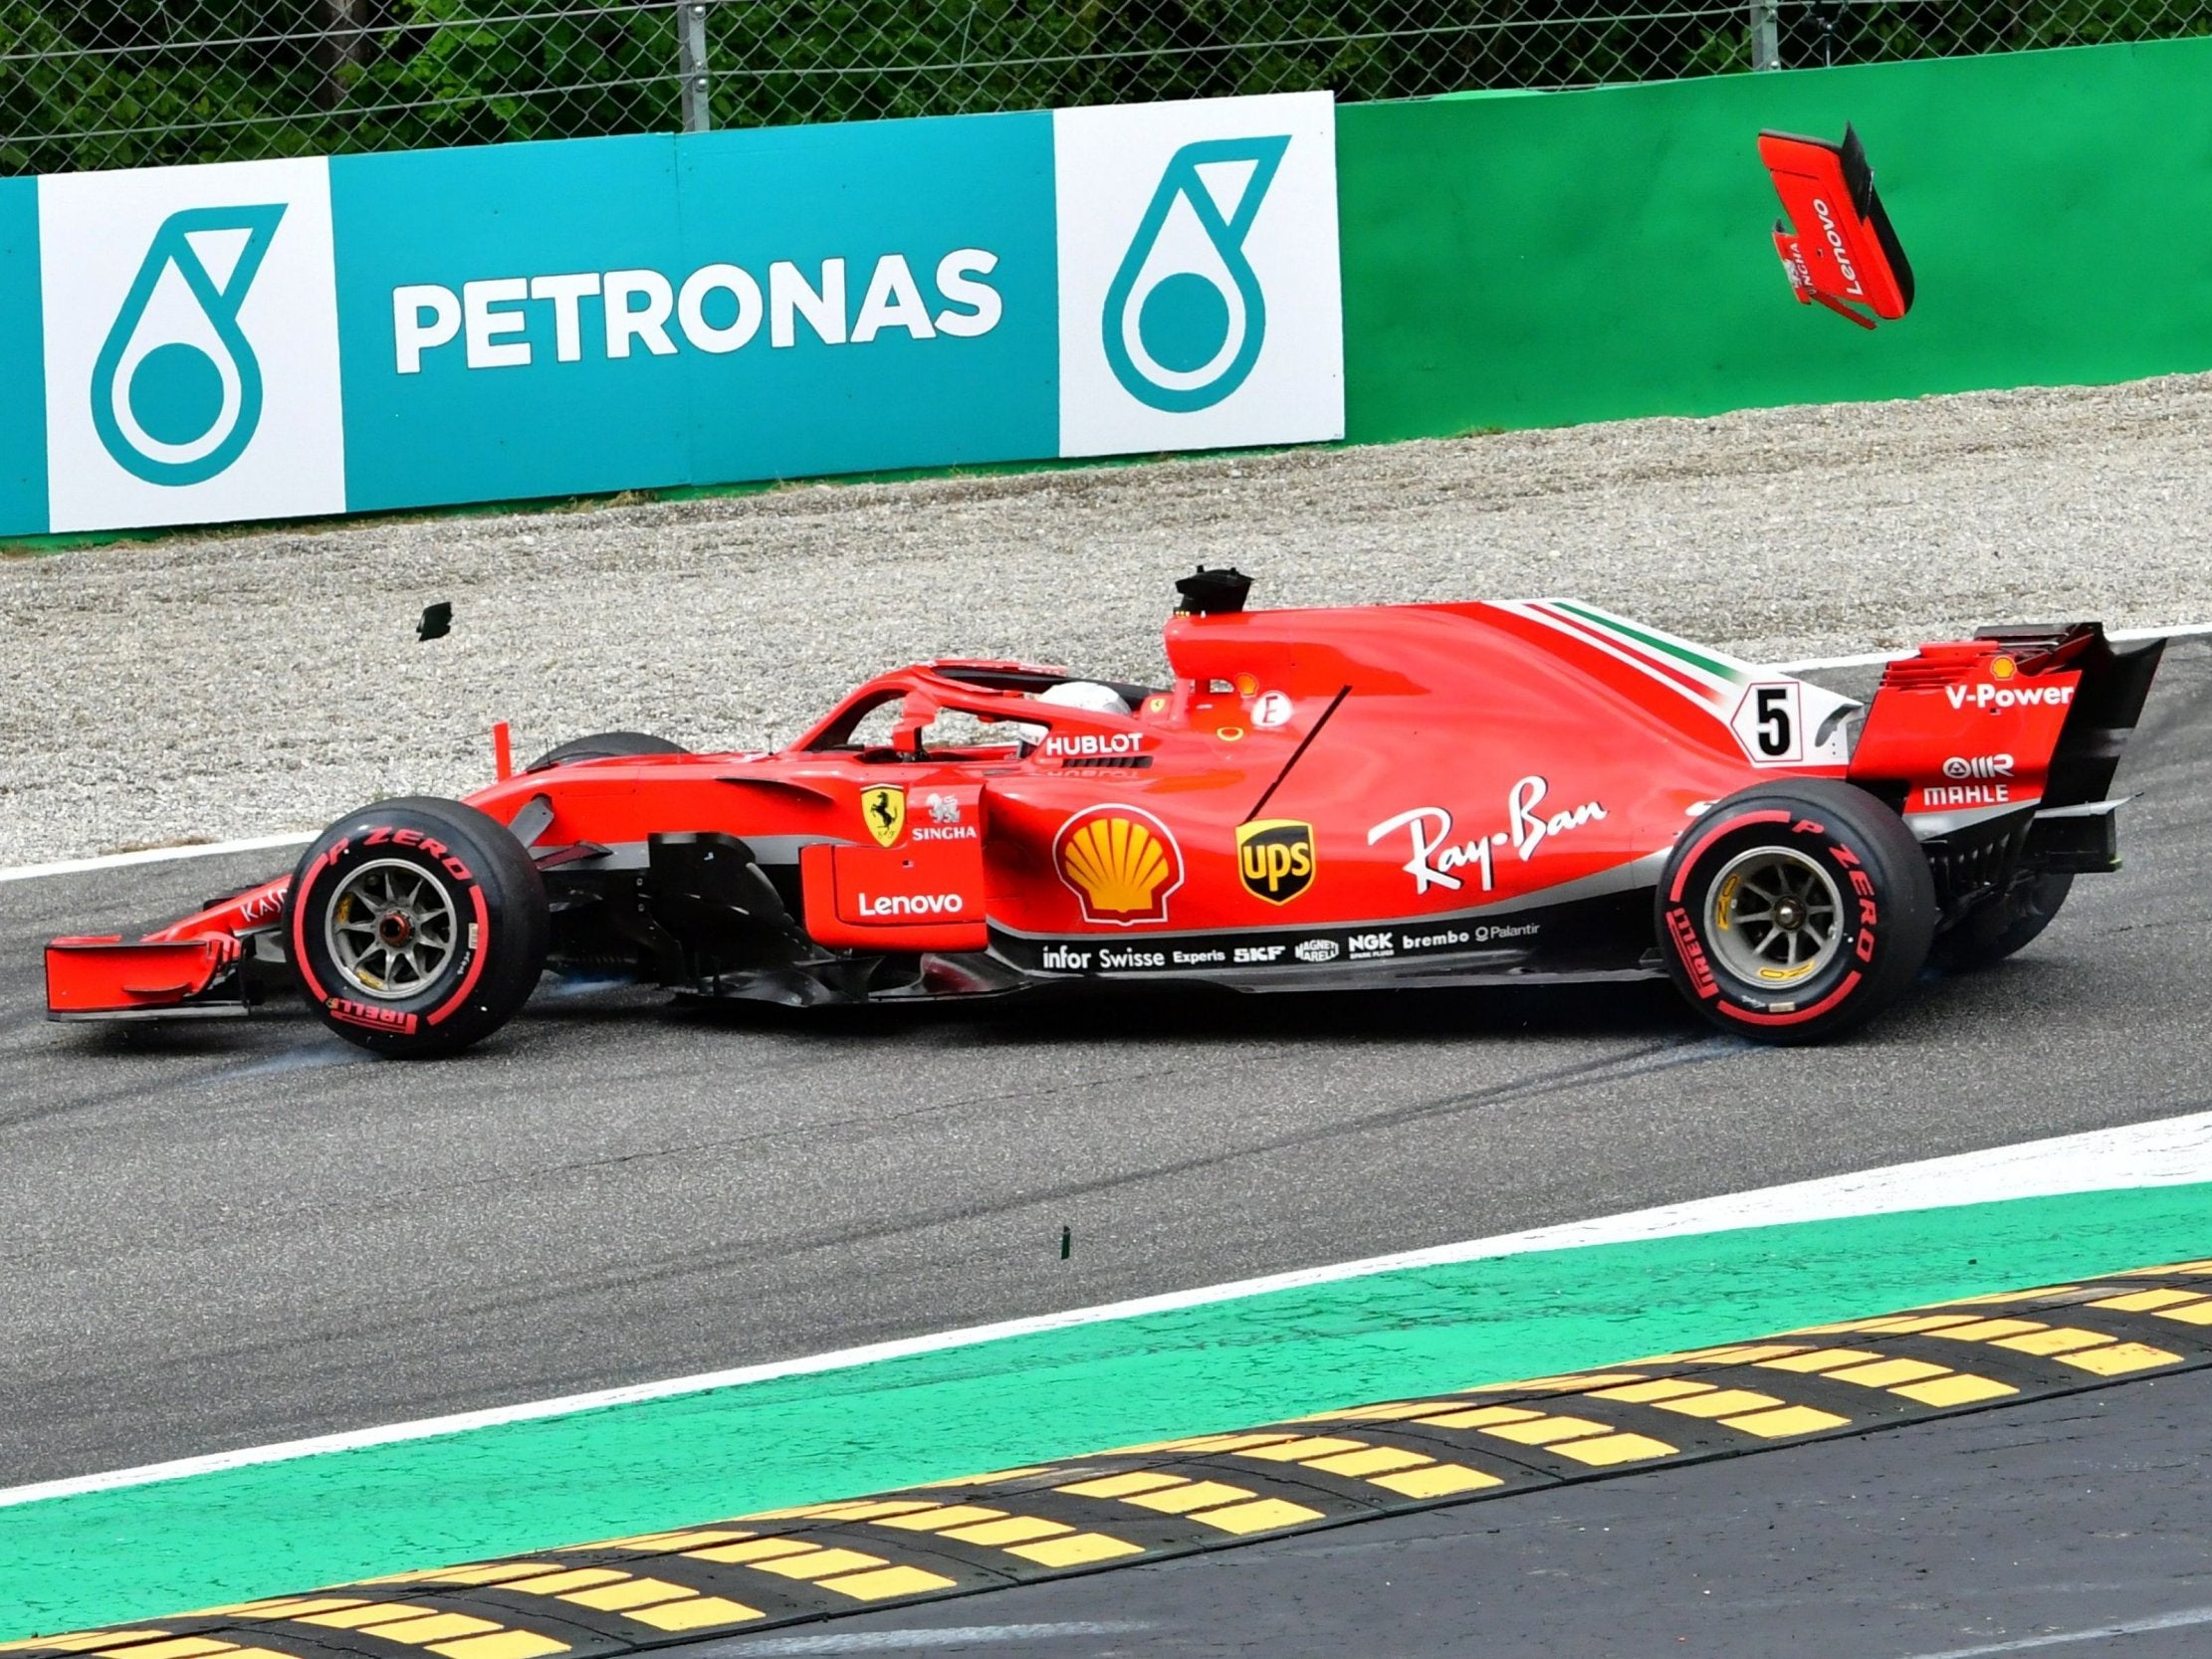 Vettel's Ferrari was left damaged by the contact with Hamilton